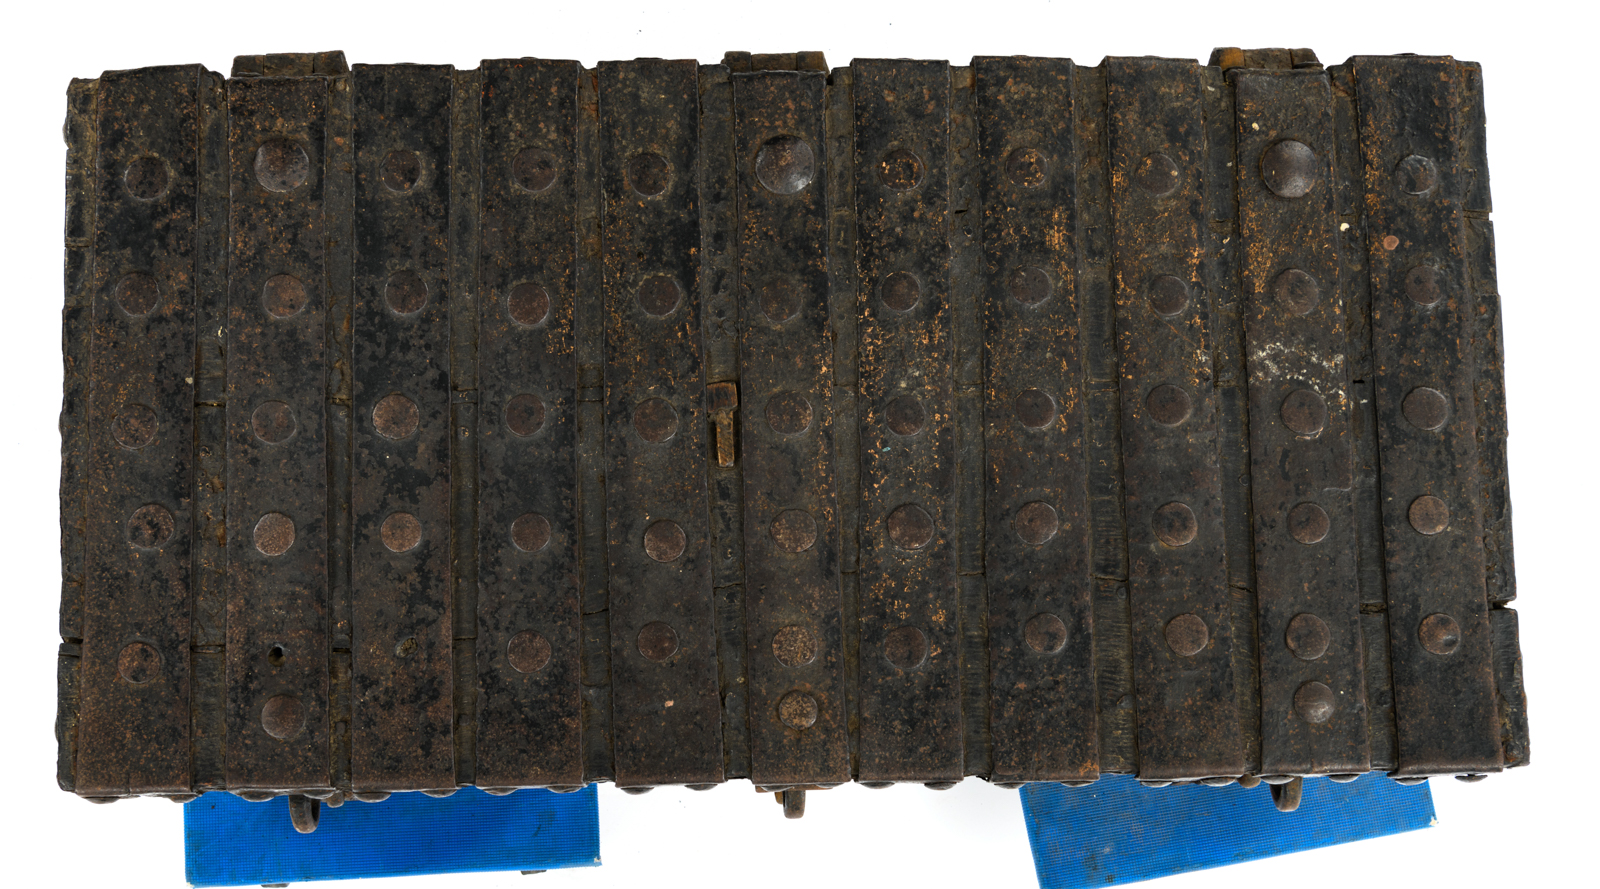 A wrought iron archive chest, 17thC, H 44 - W 100 - D 53 cm - Image 7 of 7